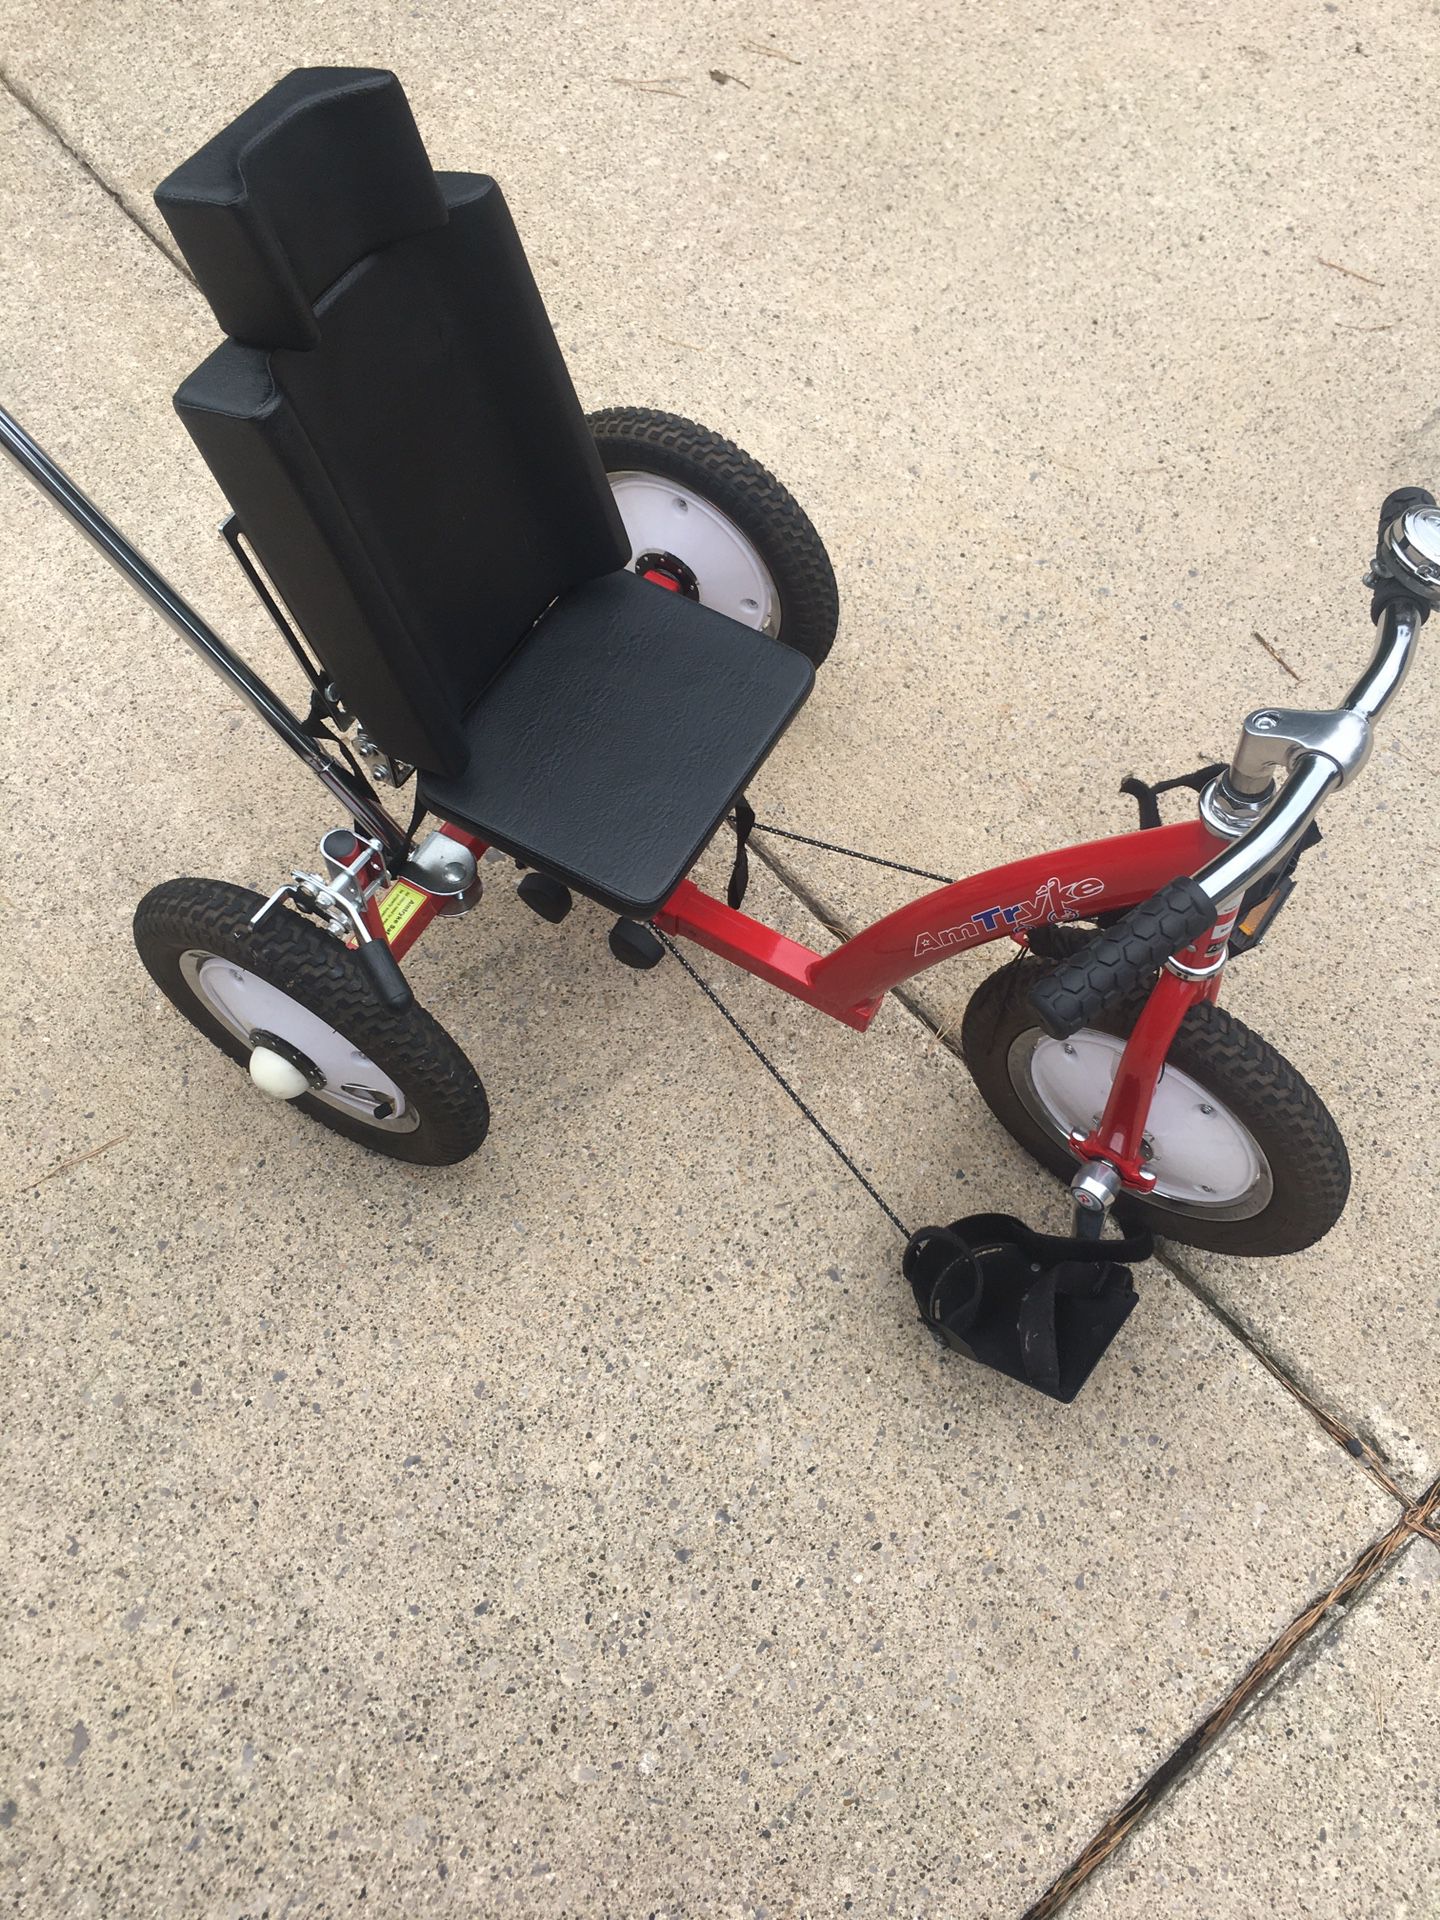 Amtryke 3 wheel bike for kids durable hardware also for special needs features